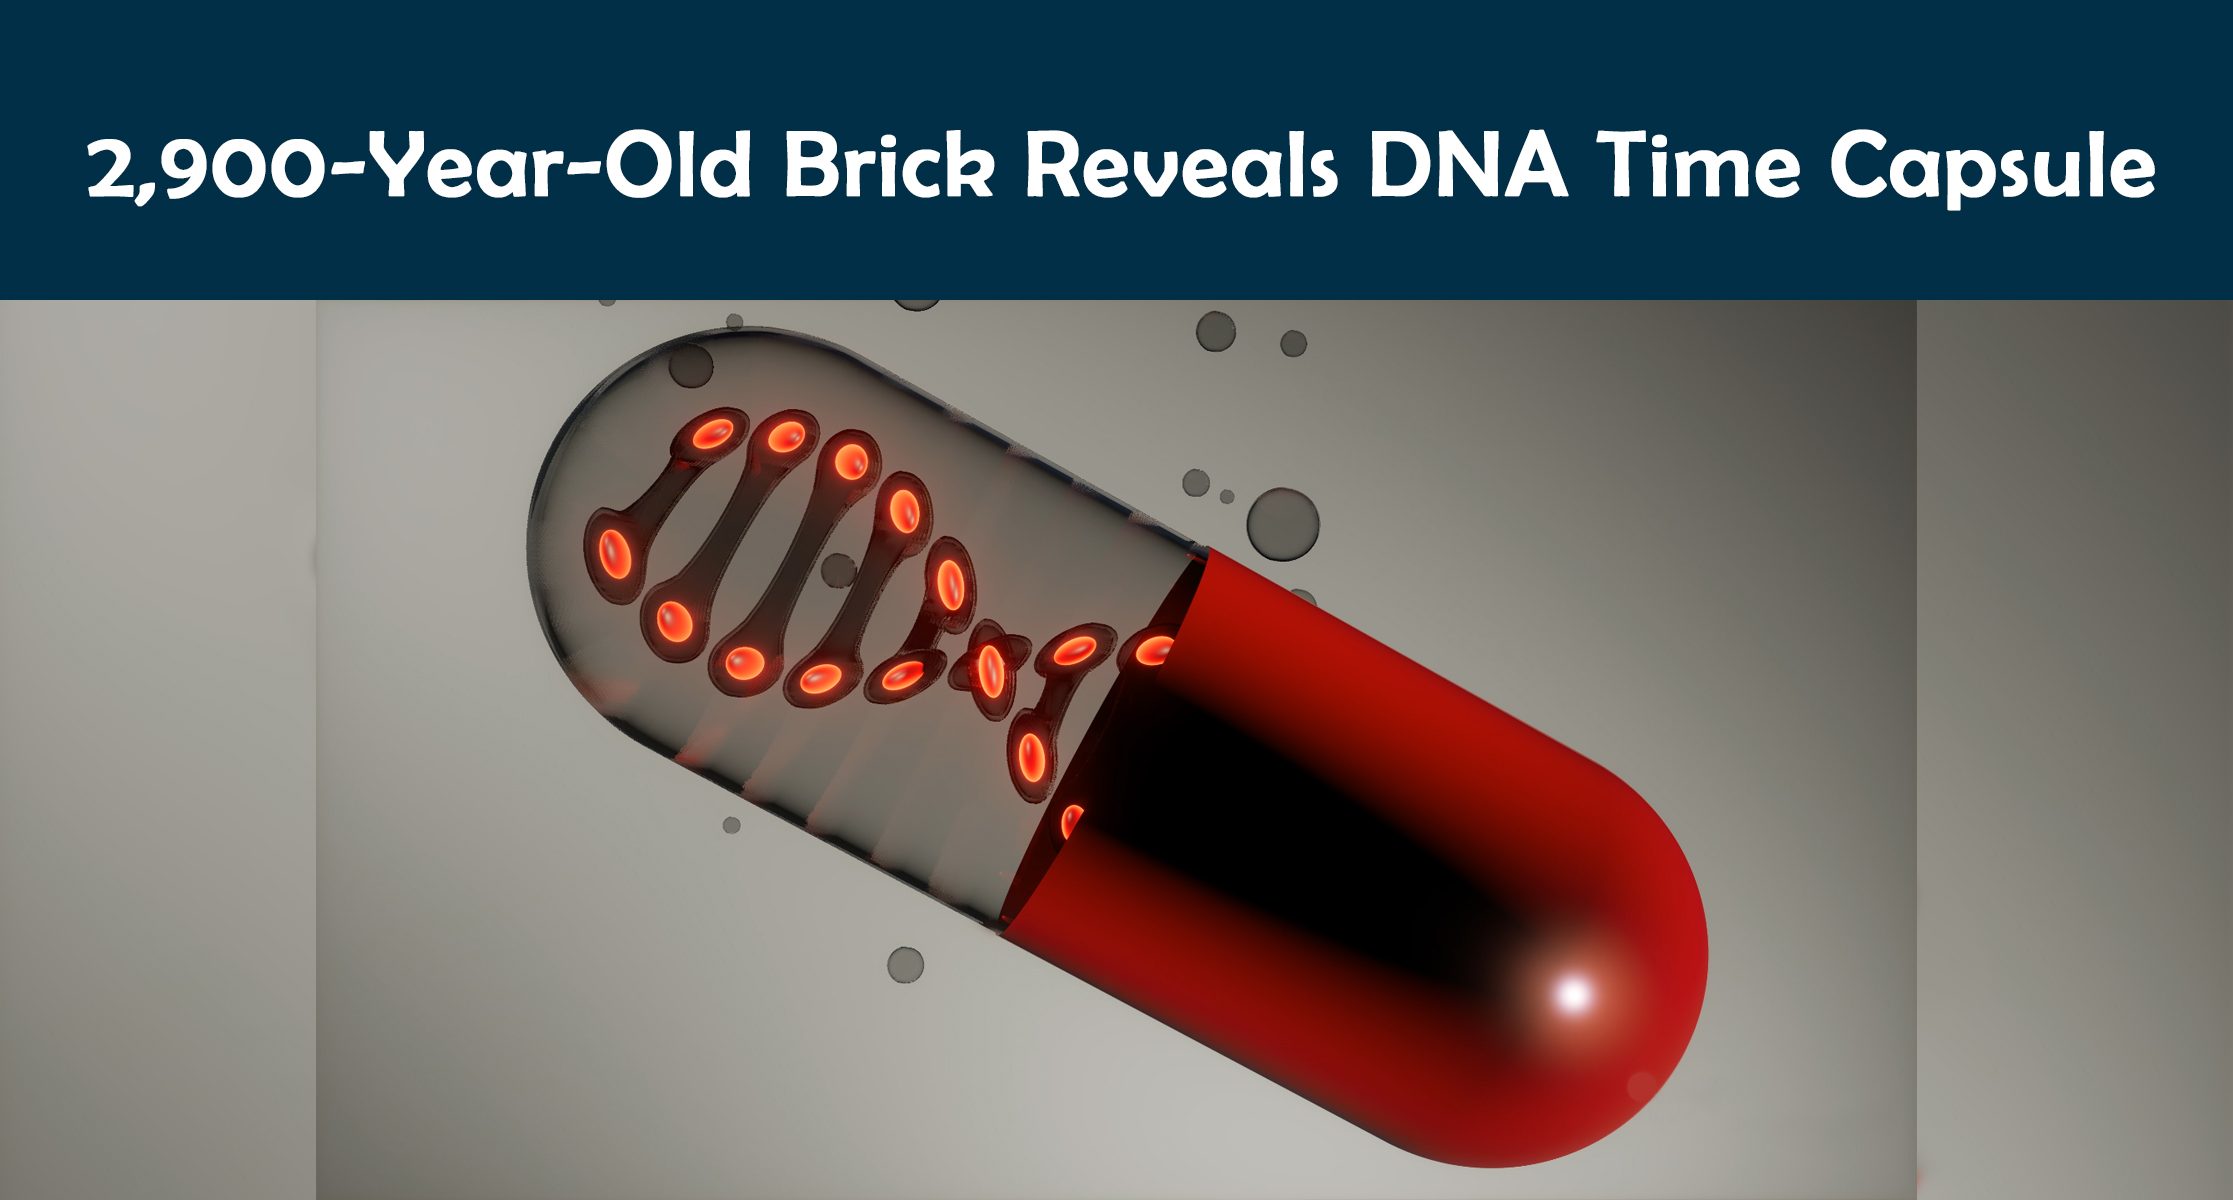 Researchers extract ancient DNA from a 2,900-year-old clay brick